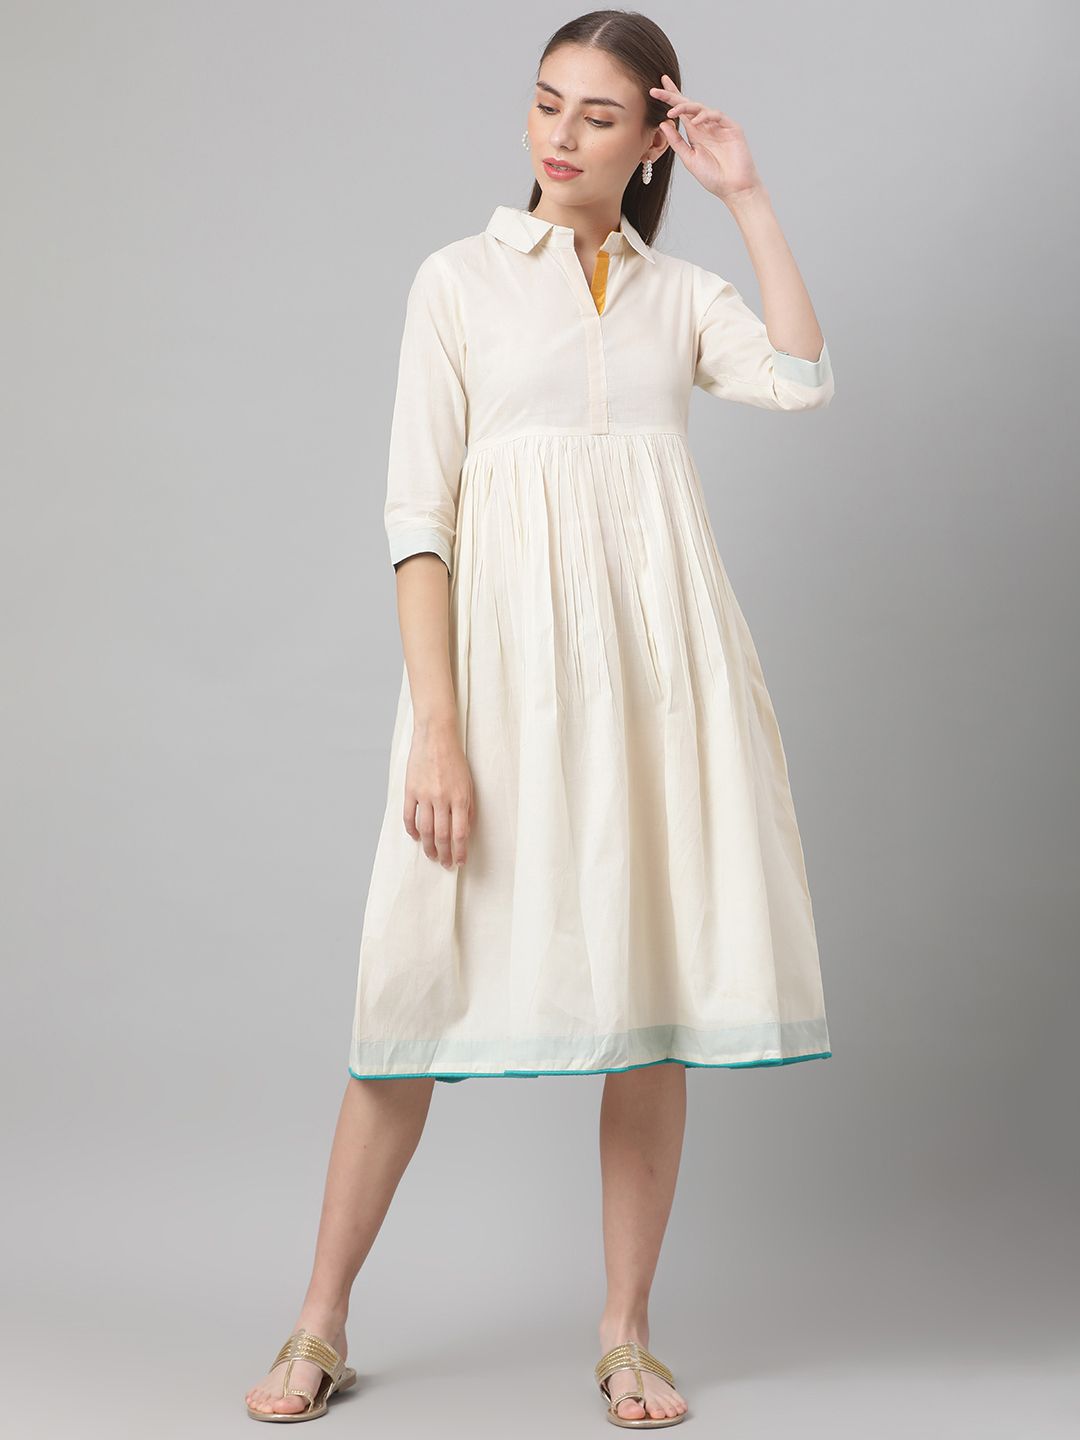 MBE White A-Line Dress Price in India